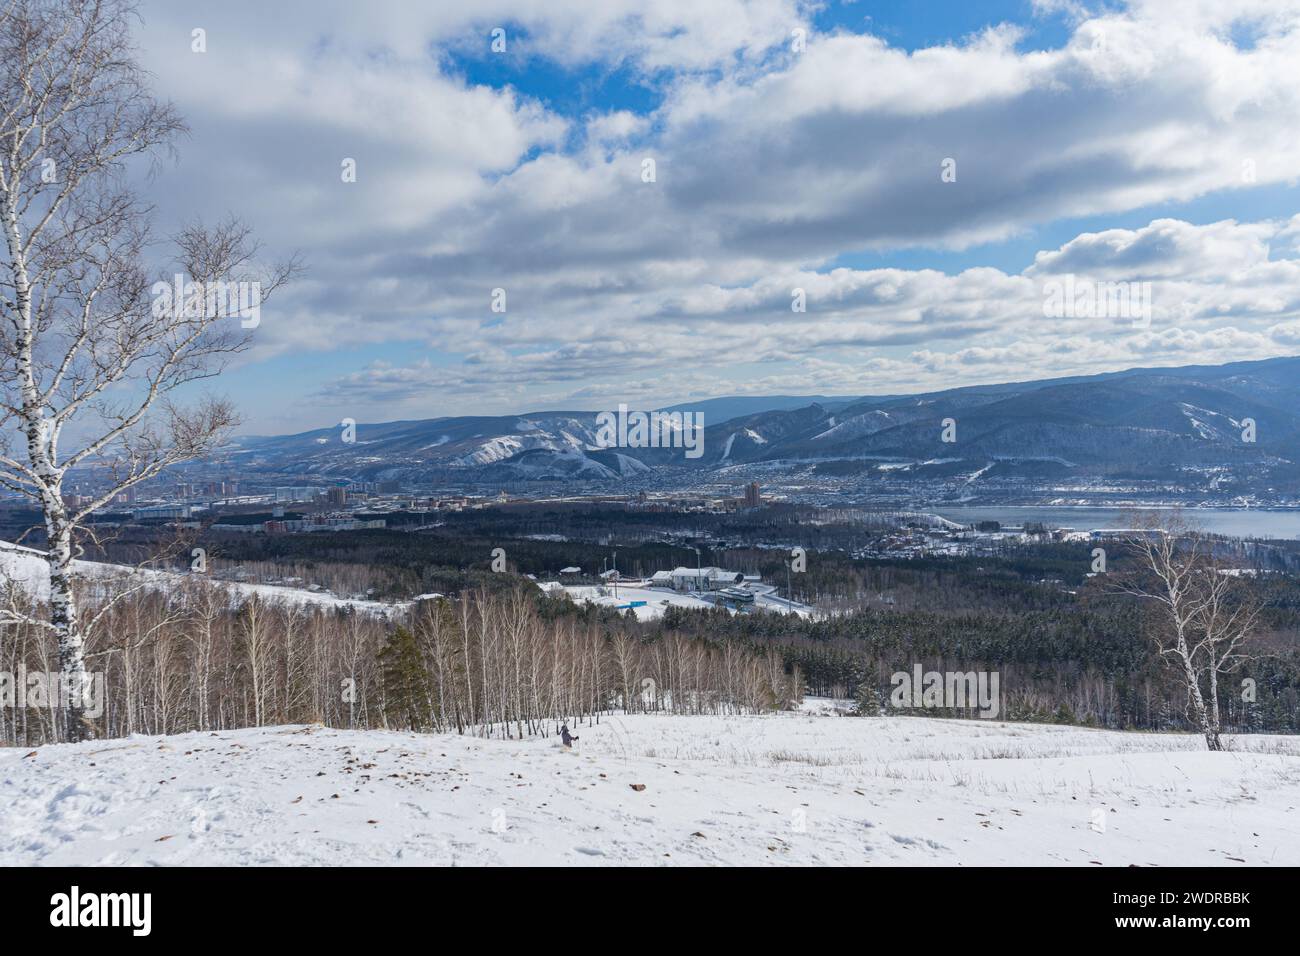 Neighborhood of city and nature. Winter natural landscape. Blue sky with low white clouds over the town. Gremyachaya Griva Park, Krasnoyarsk, Russia. Stock Photo